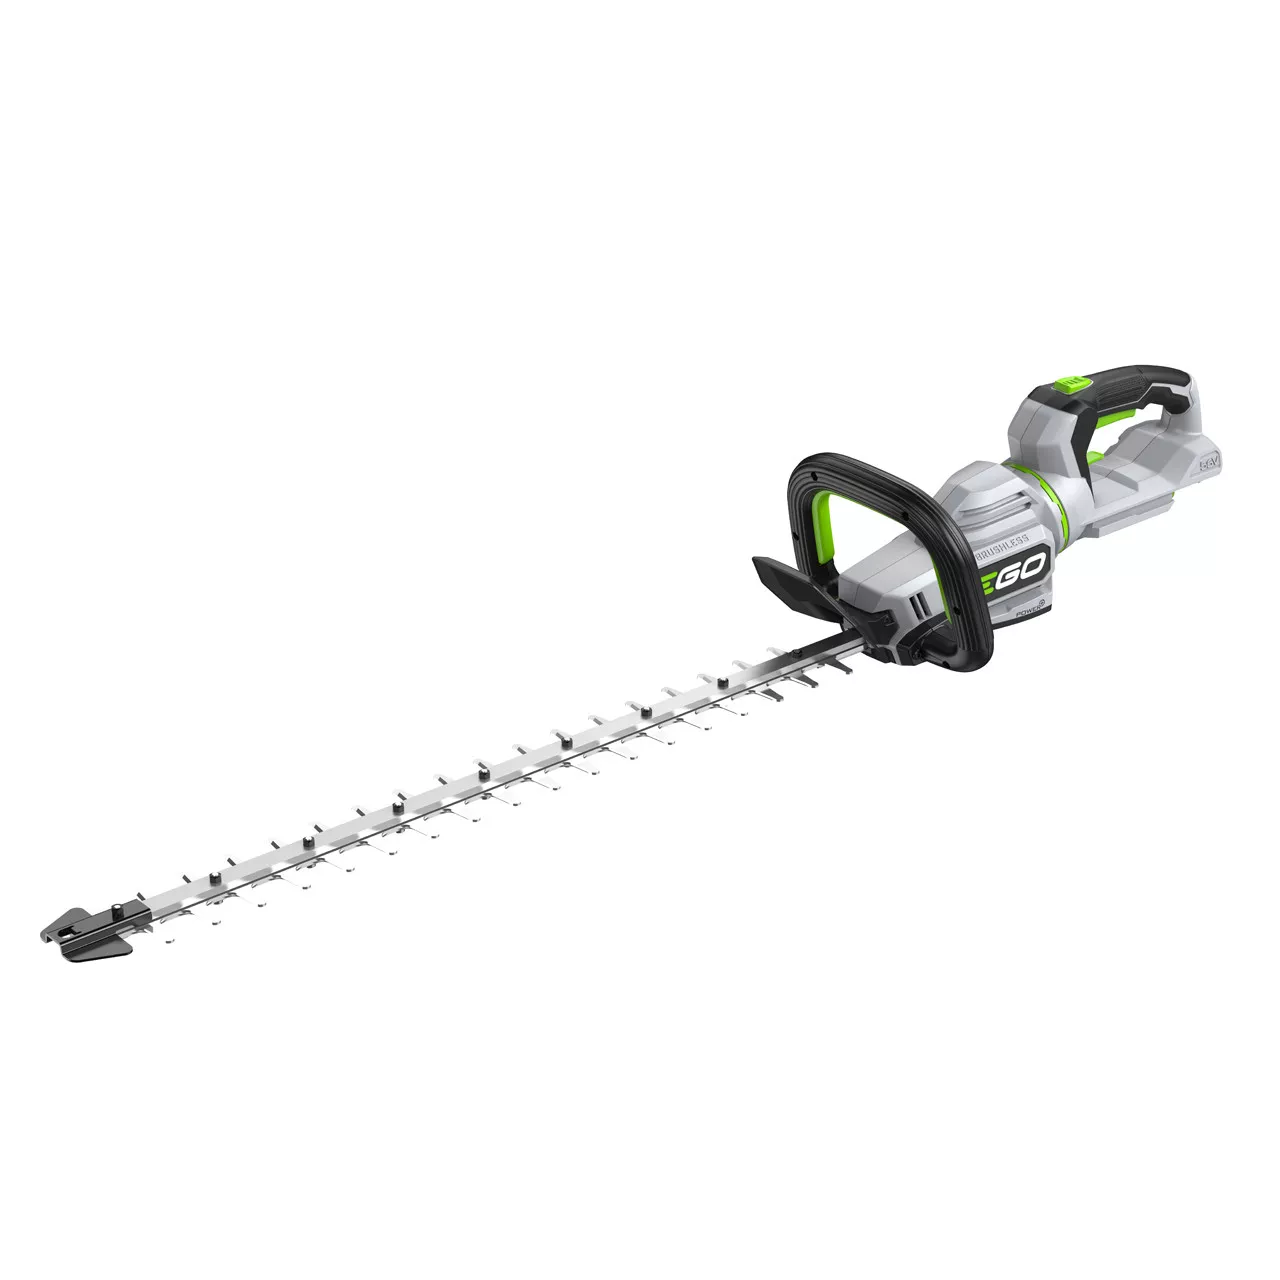 HT2600E Power Plus 66cm Hedge Trimmer (TOOL ONLY)